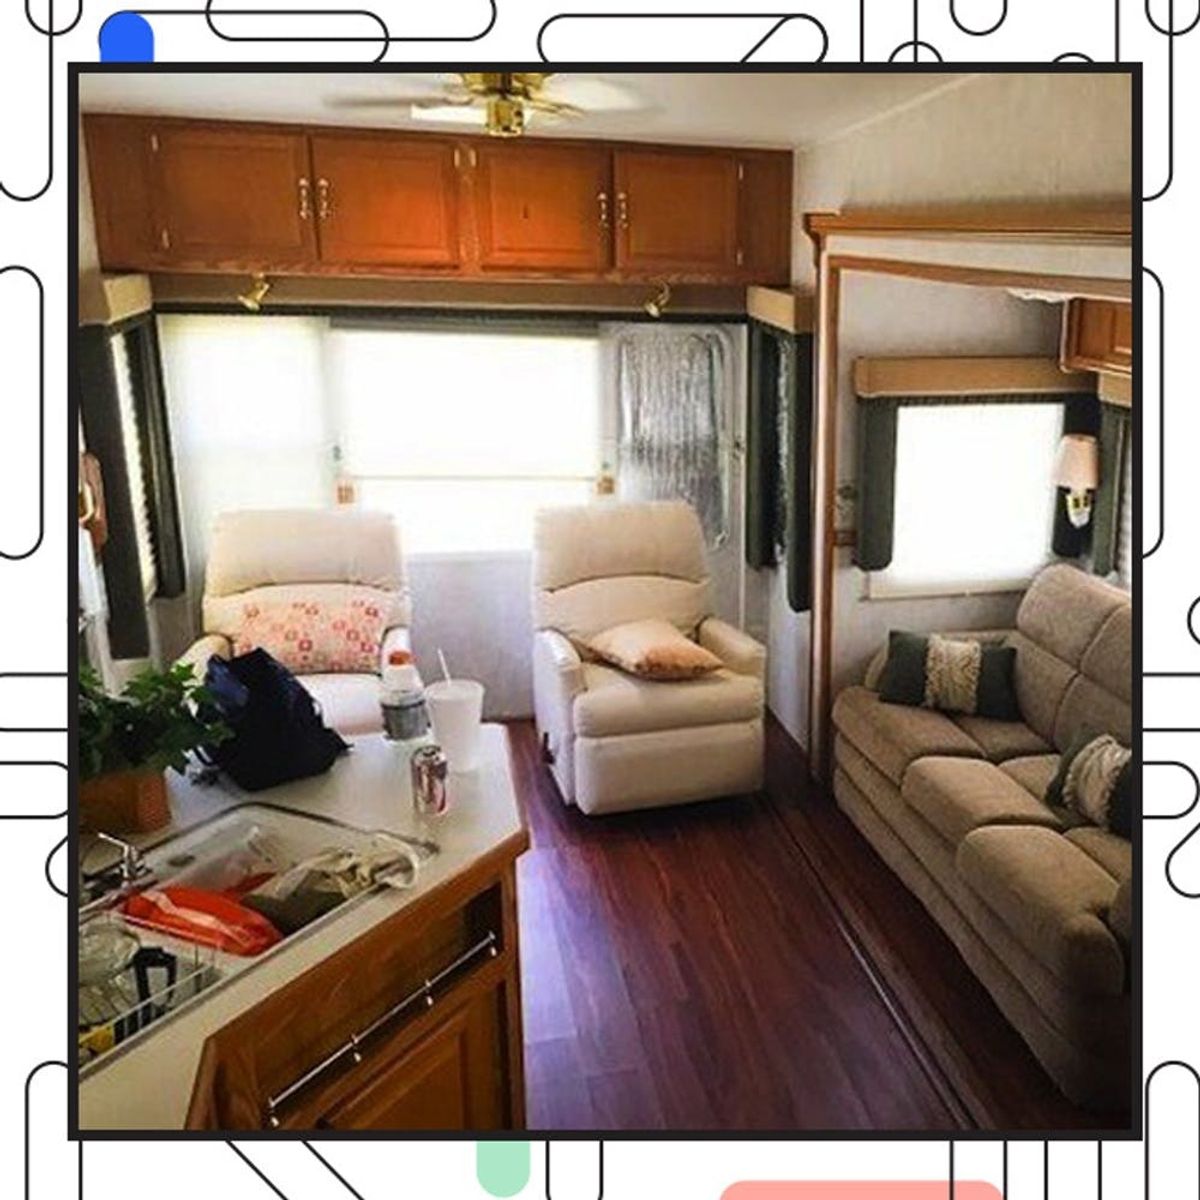 This Blogger’s Vintage Camper Makeover Is a Dream Come True